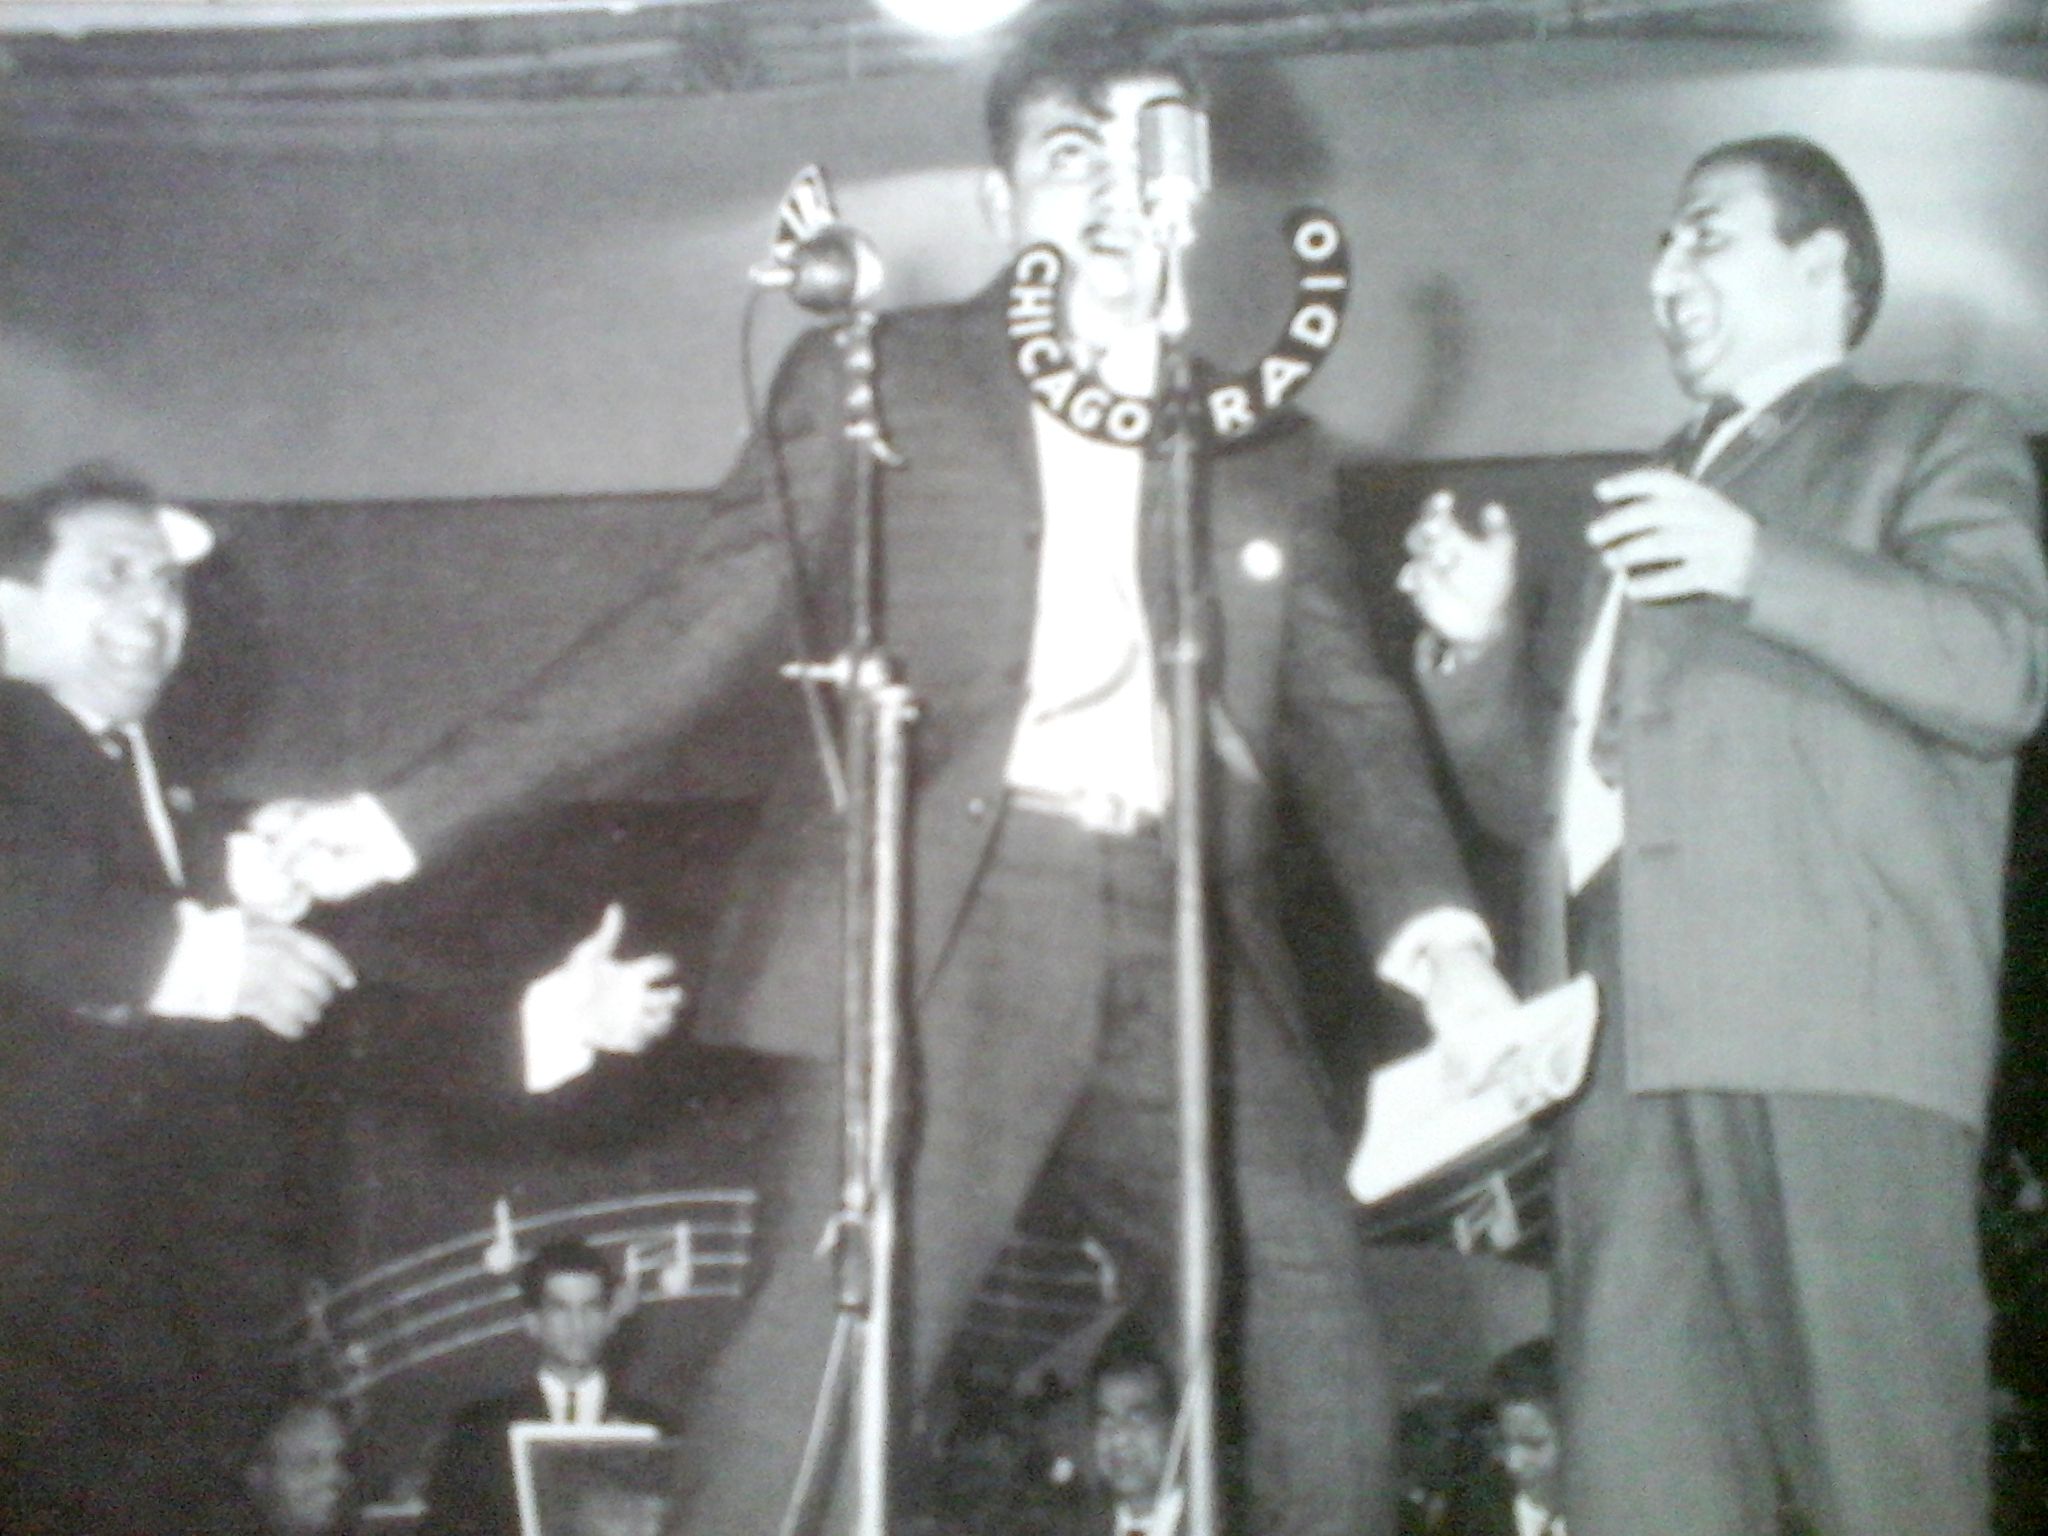 Rafi singing with Mehmood in a concert